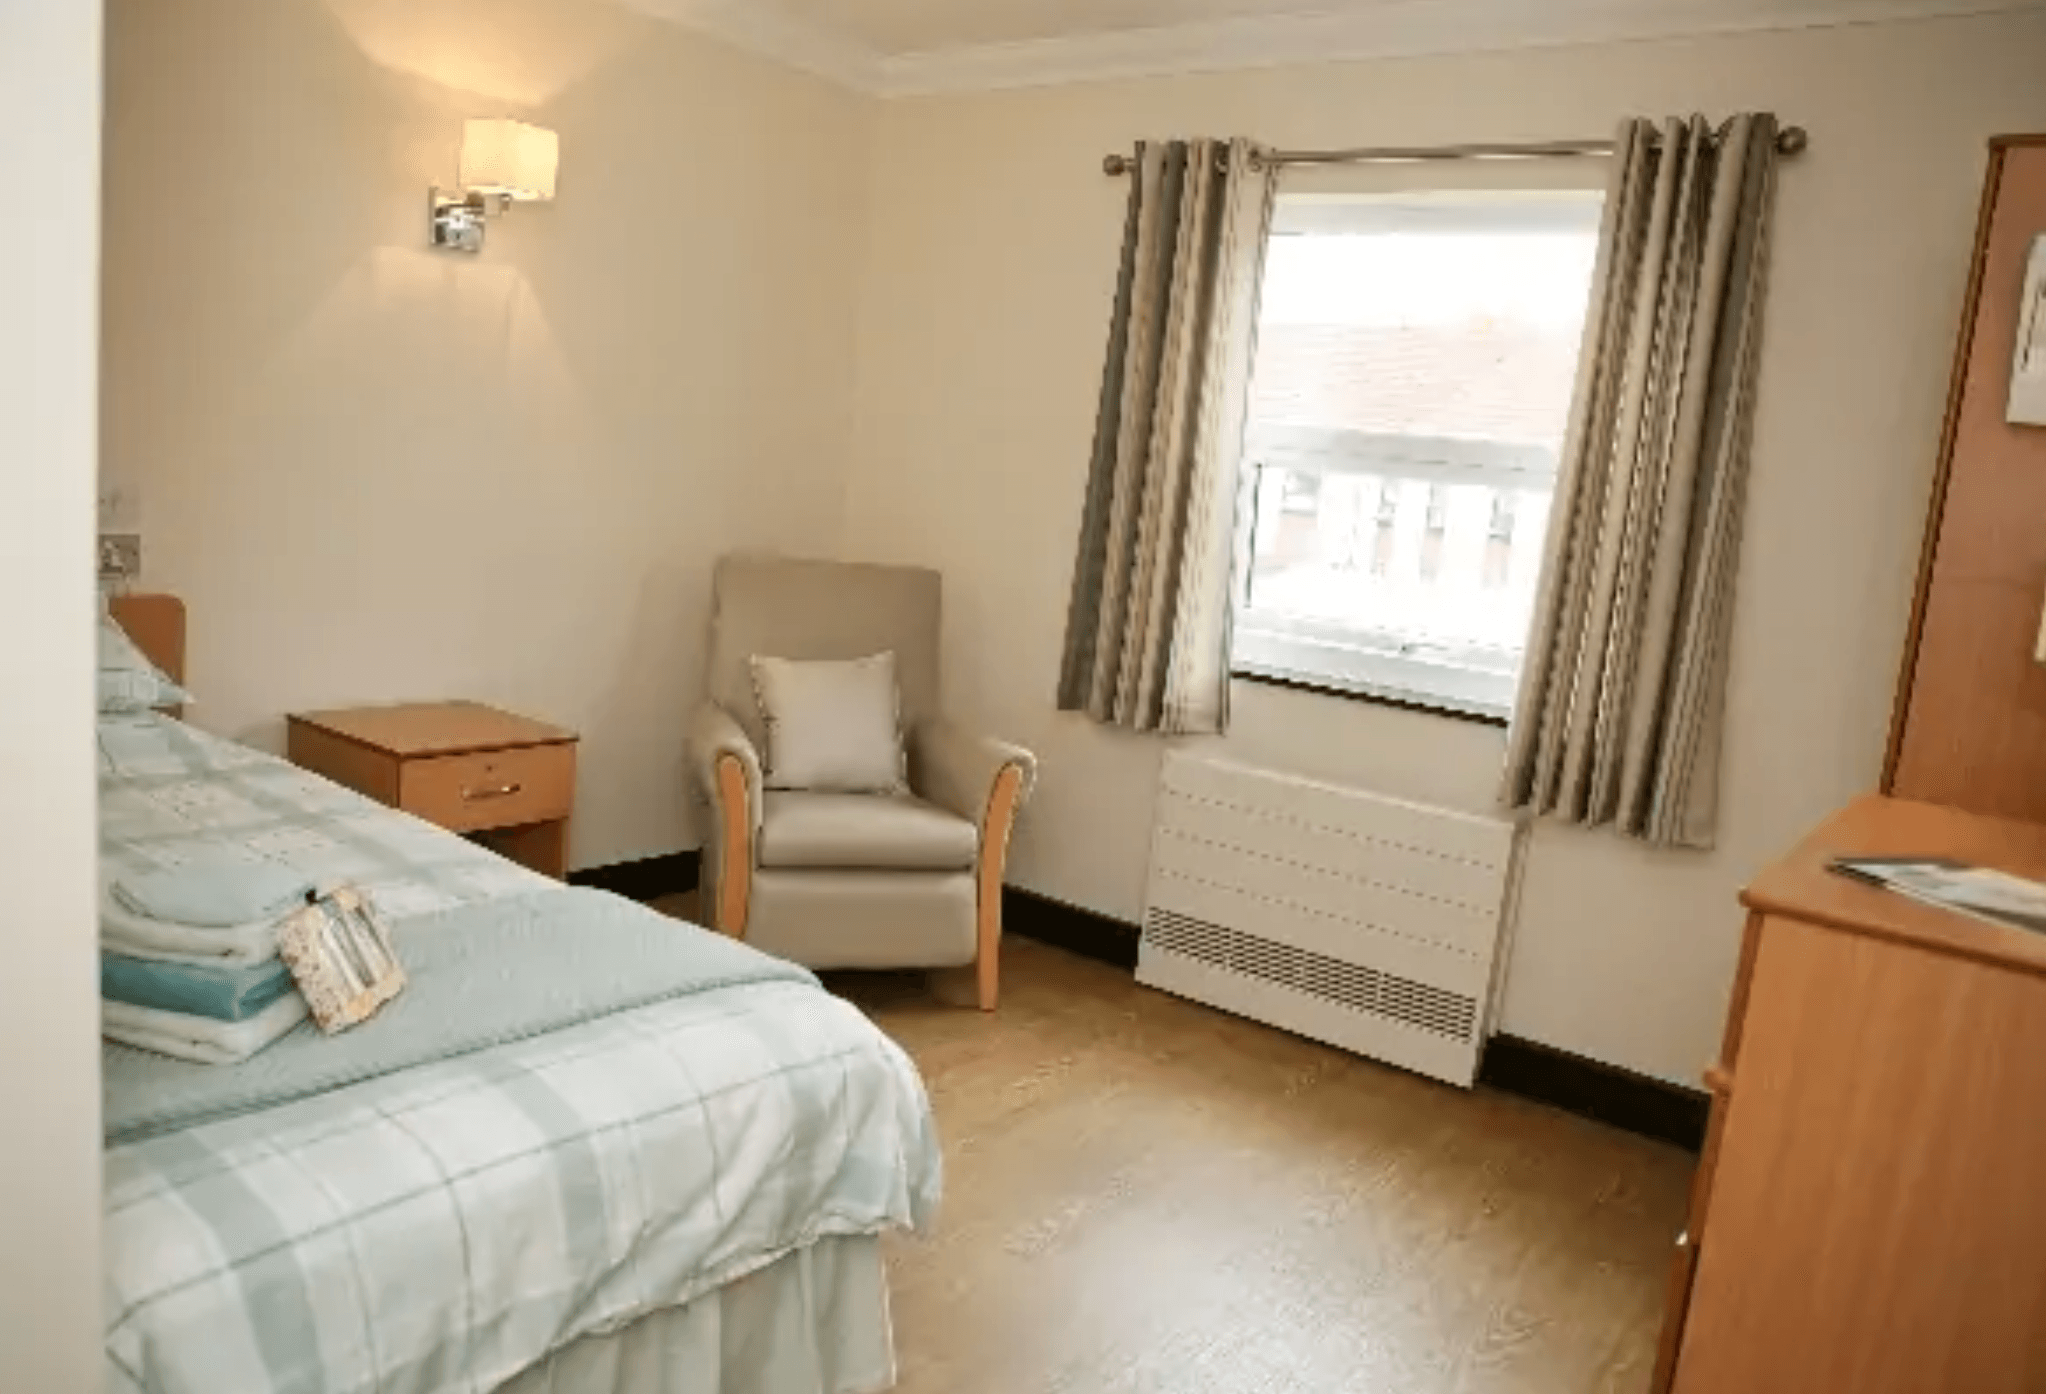 Bedroom of Bright Meadows in Bolton, Greater Manchester